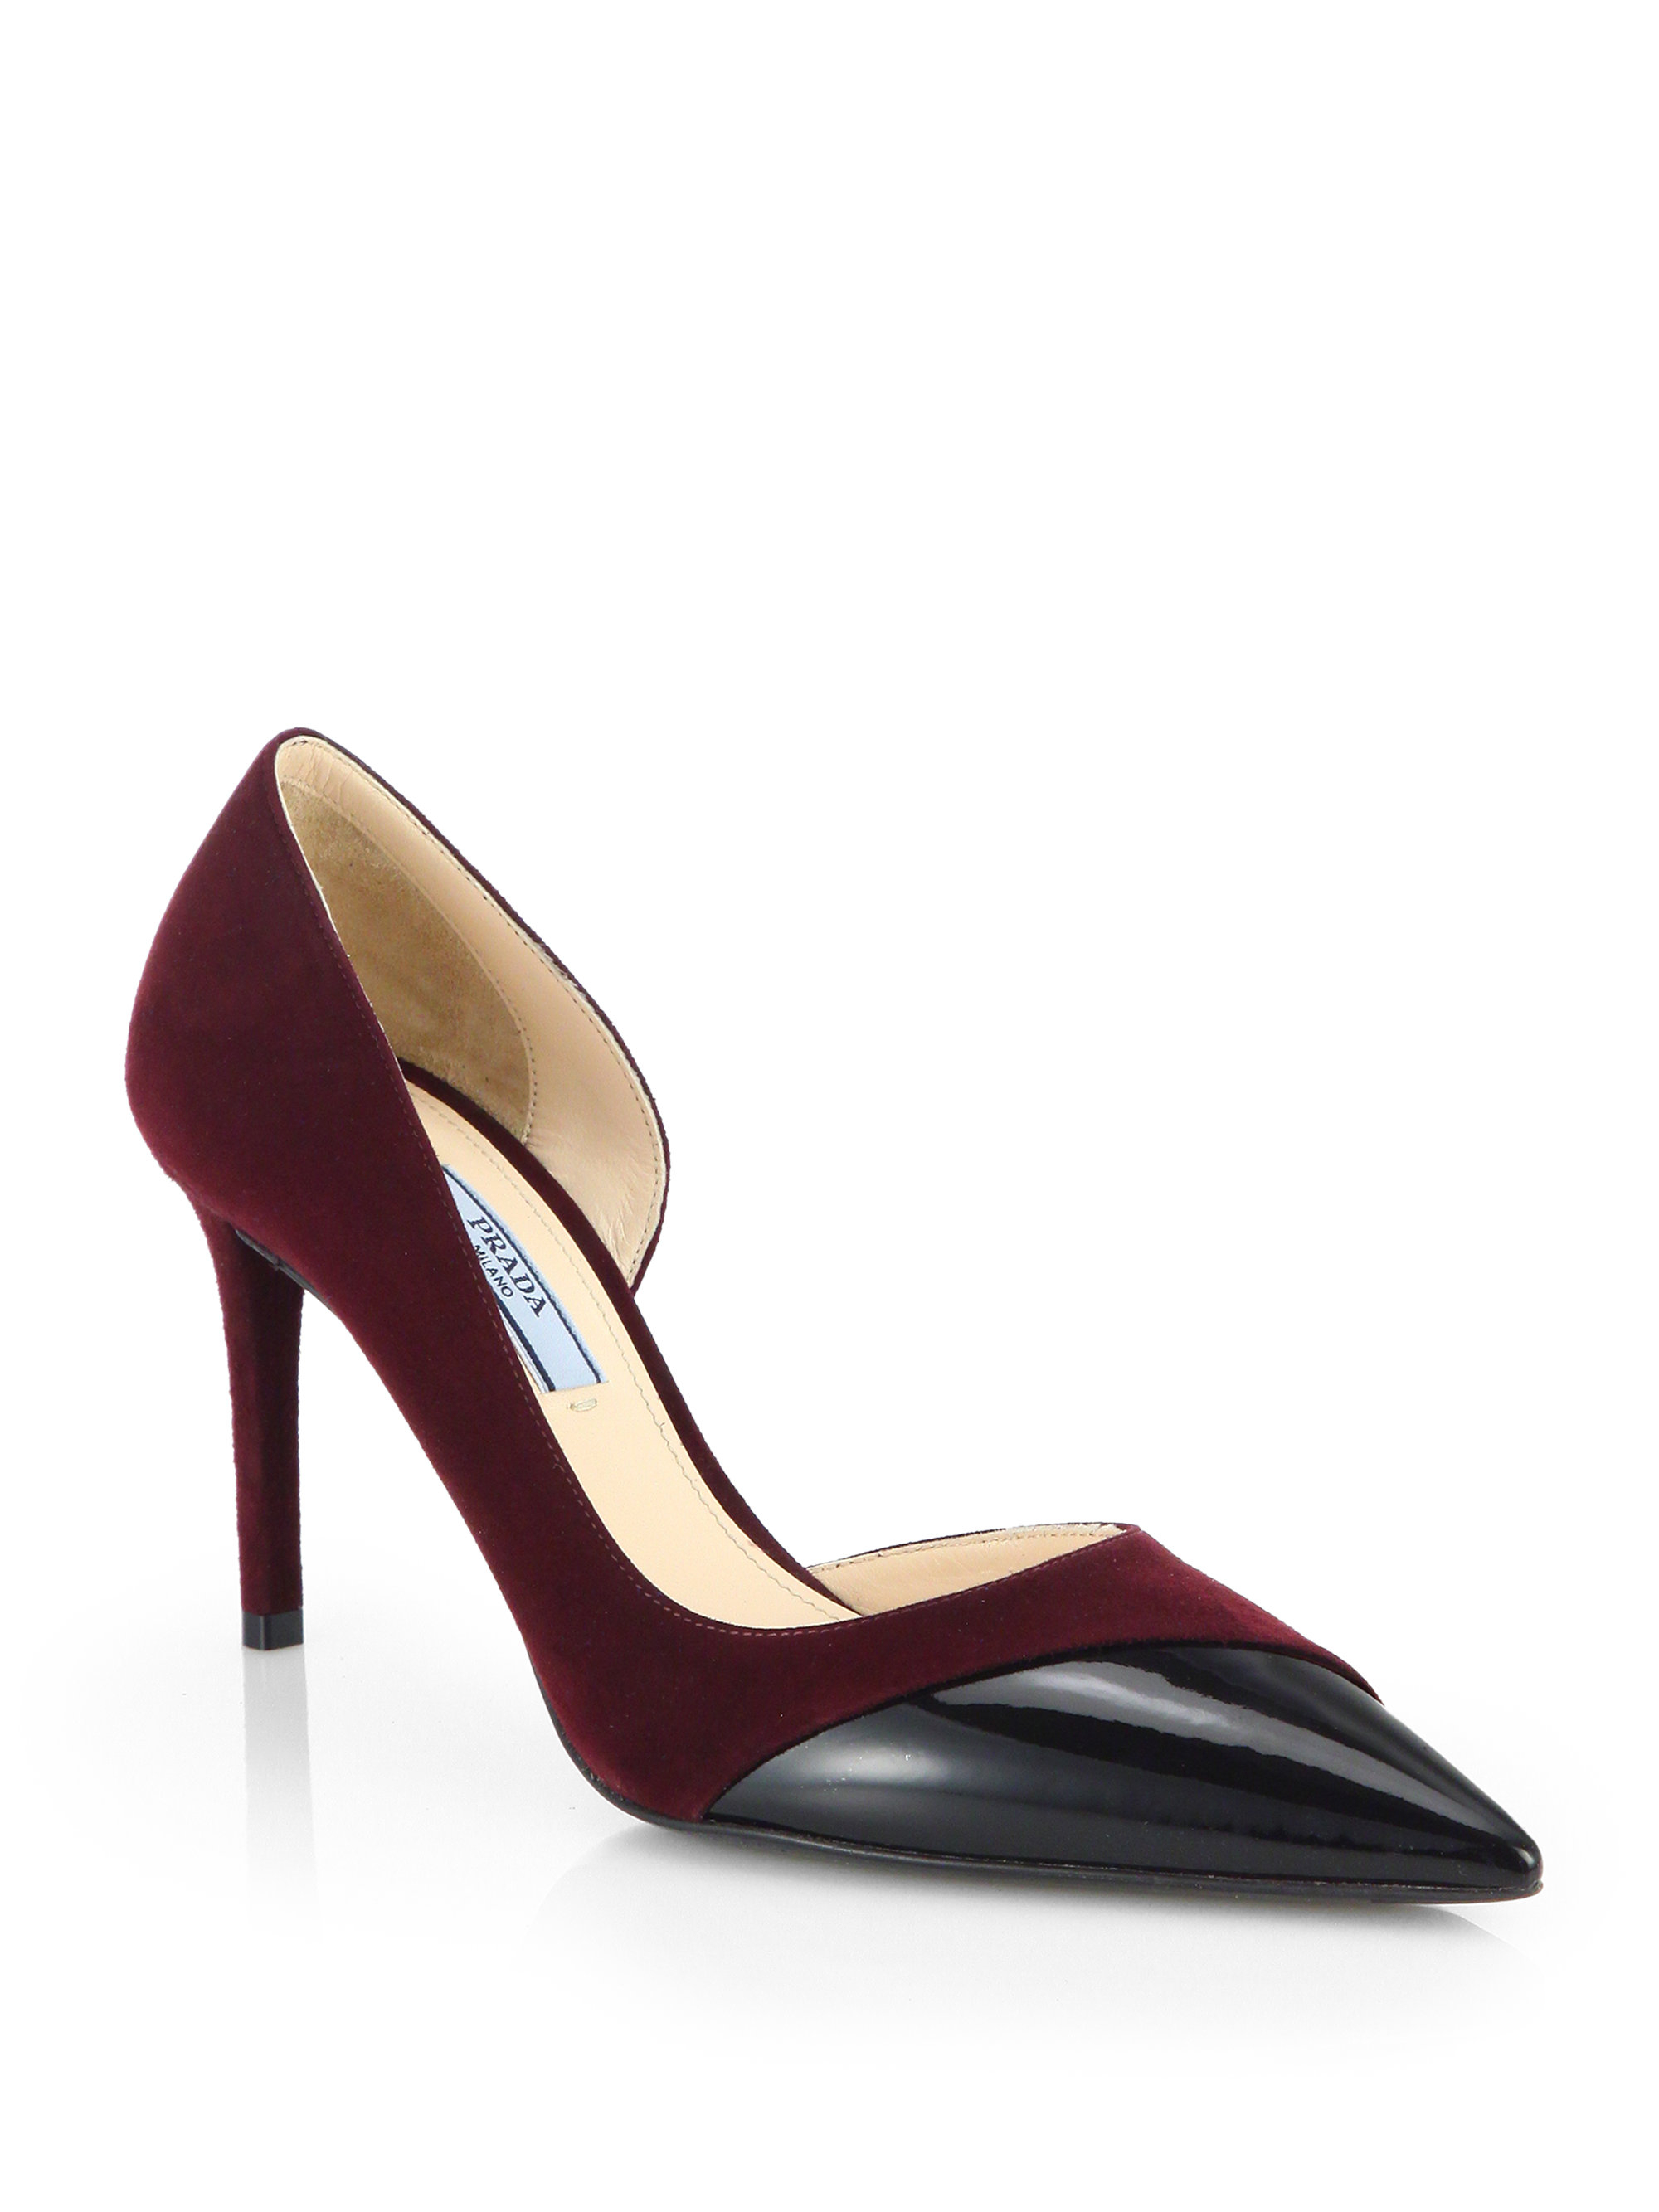 Prada Suede & Patent Leather Point-Toe Pumps in Red (BURGUNDY) | Lyst